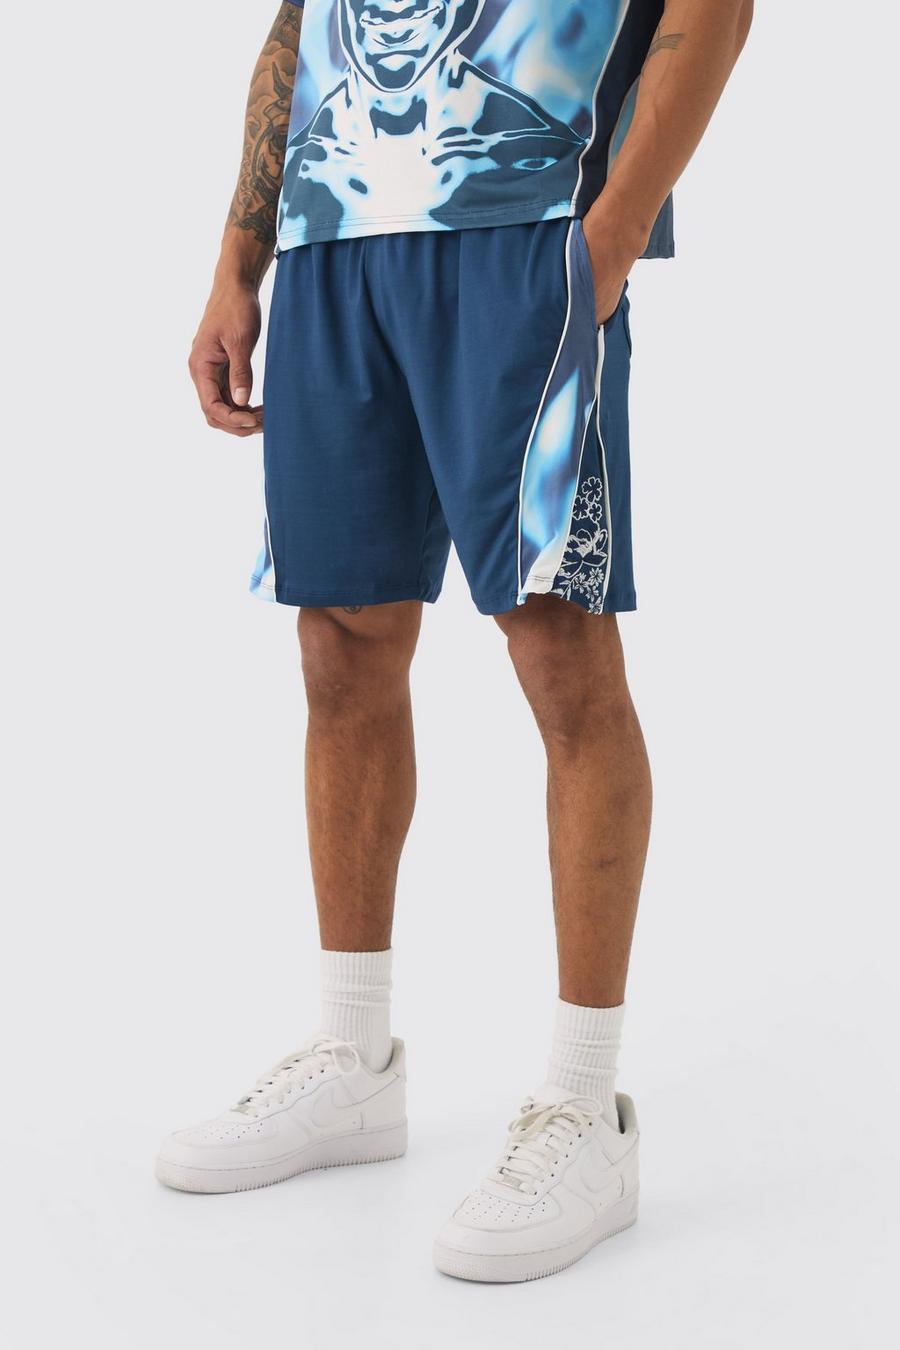 Blue Relaxed FIt Floral Printed Football Short